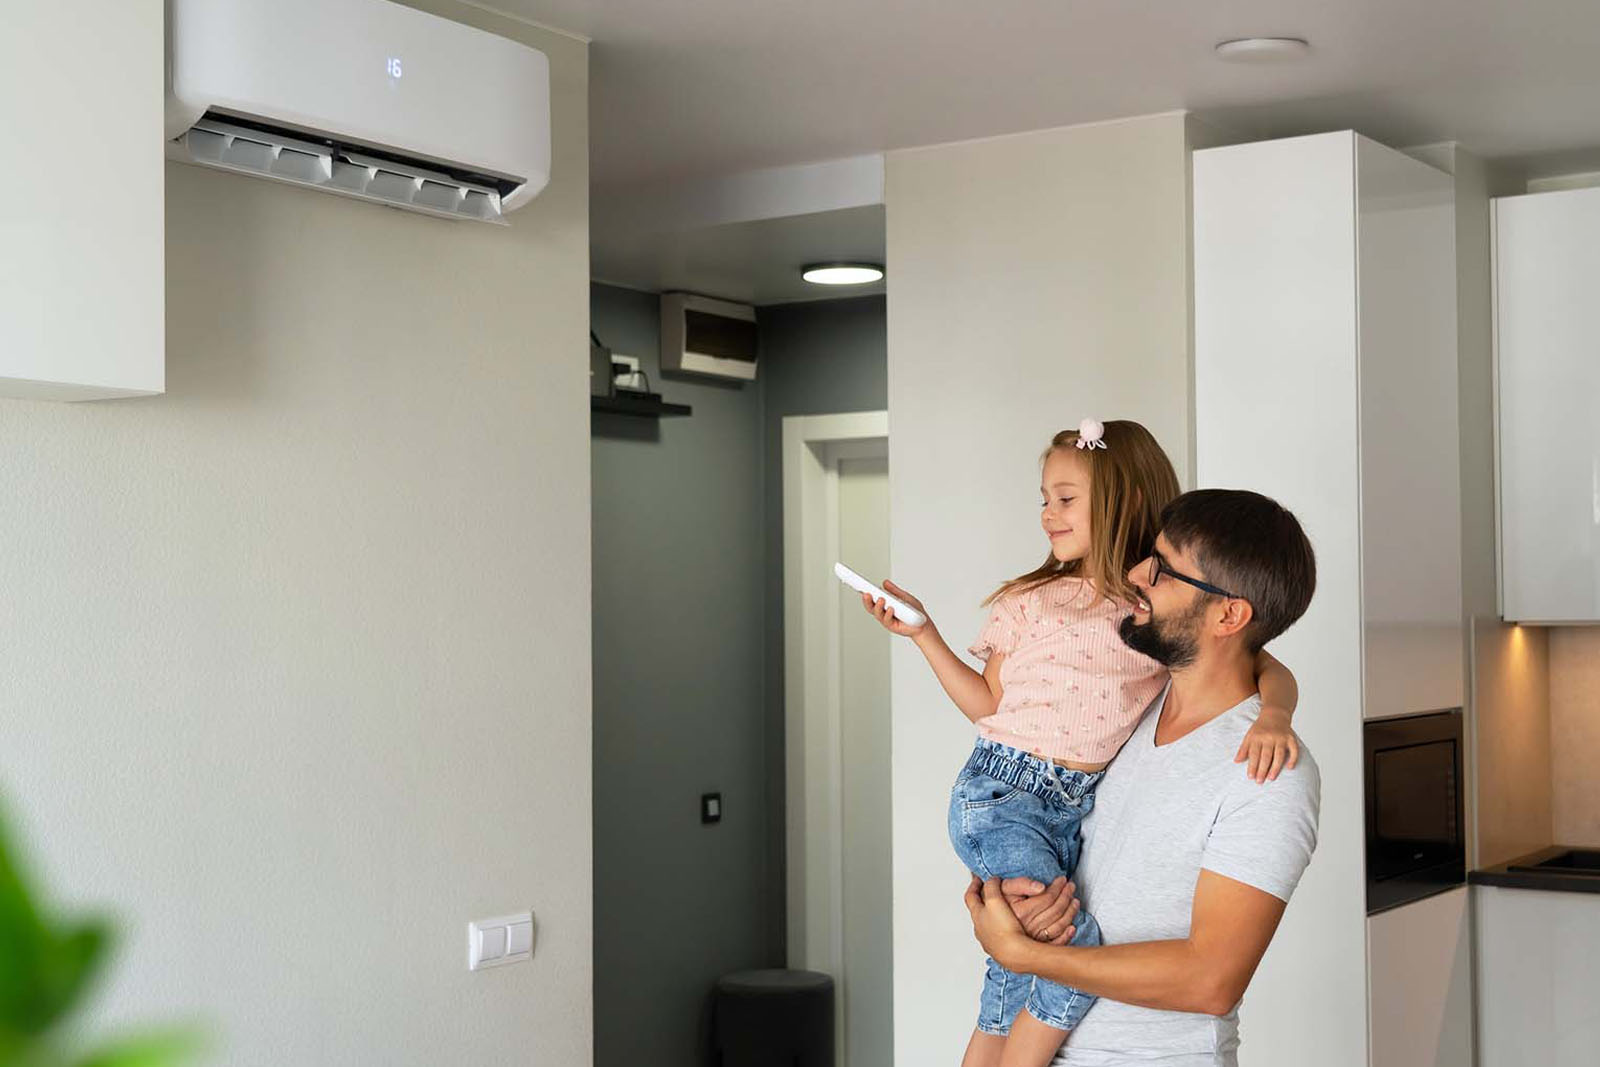 Air conditioning solutions to keep you comfortable all year round